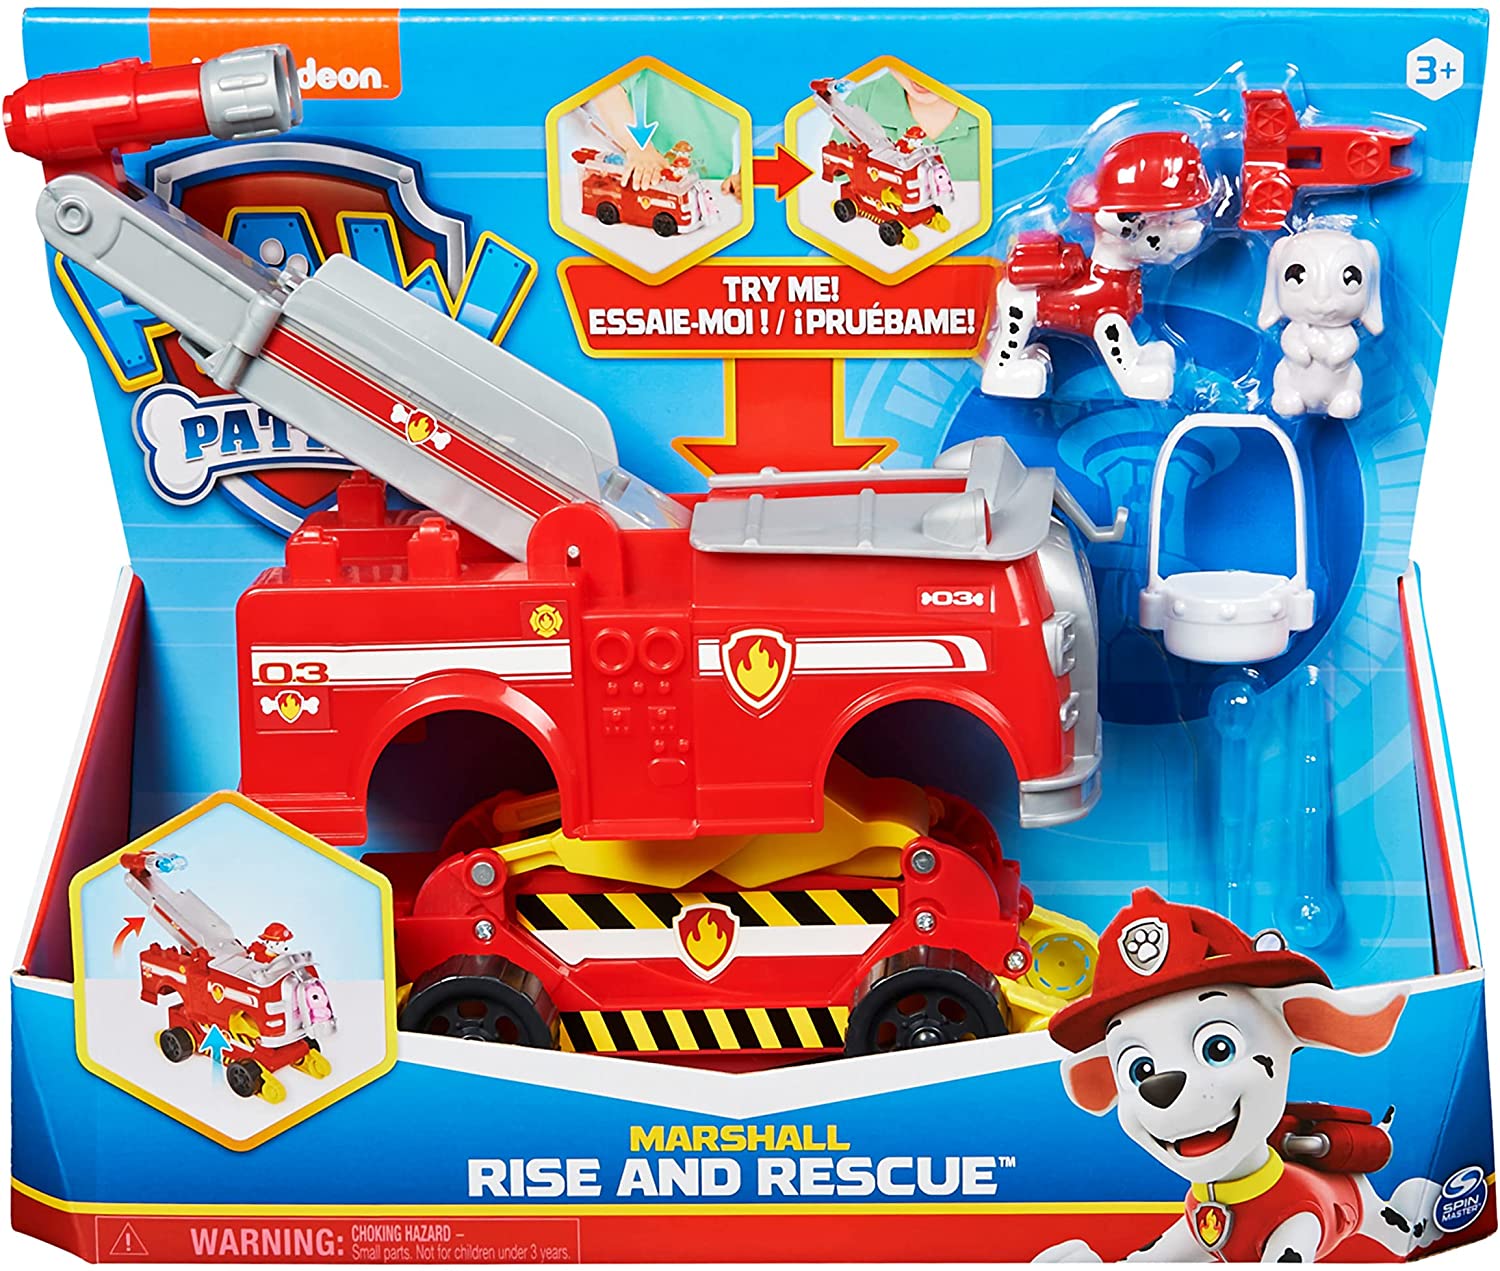 Pat patrouille marcus rise and Rescue paw patrol 20136013